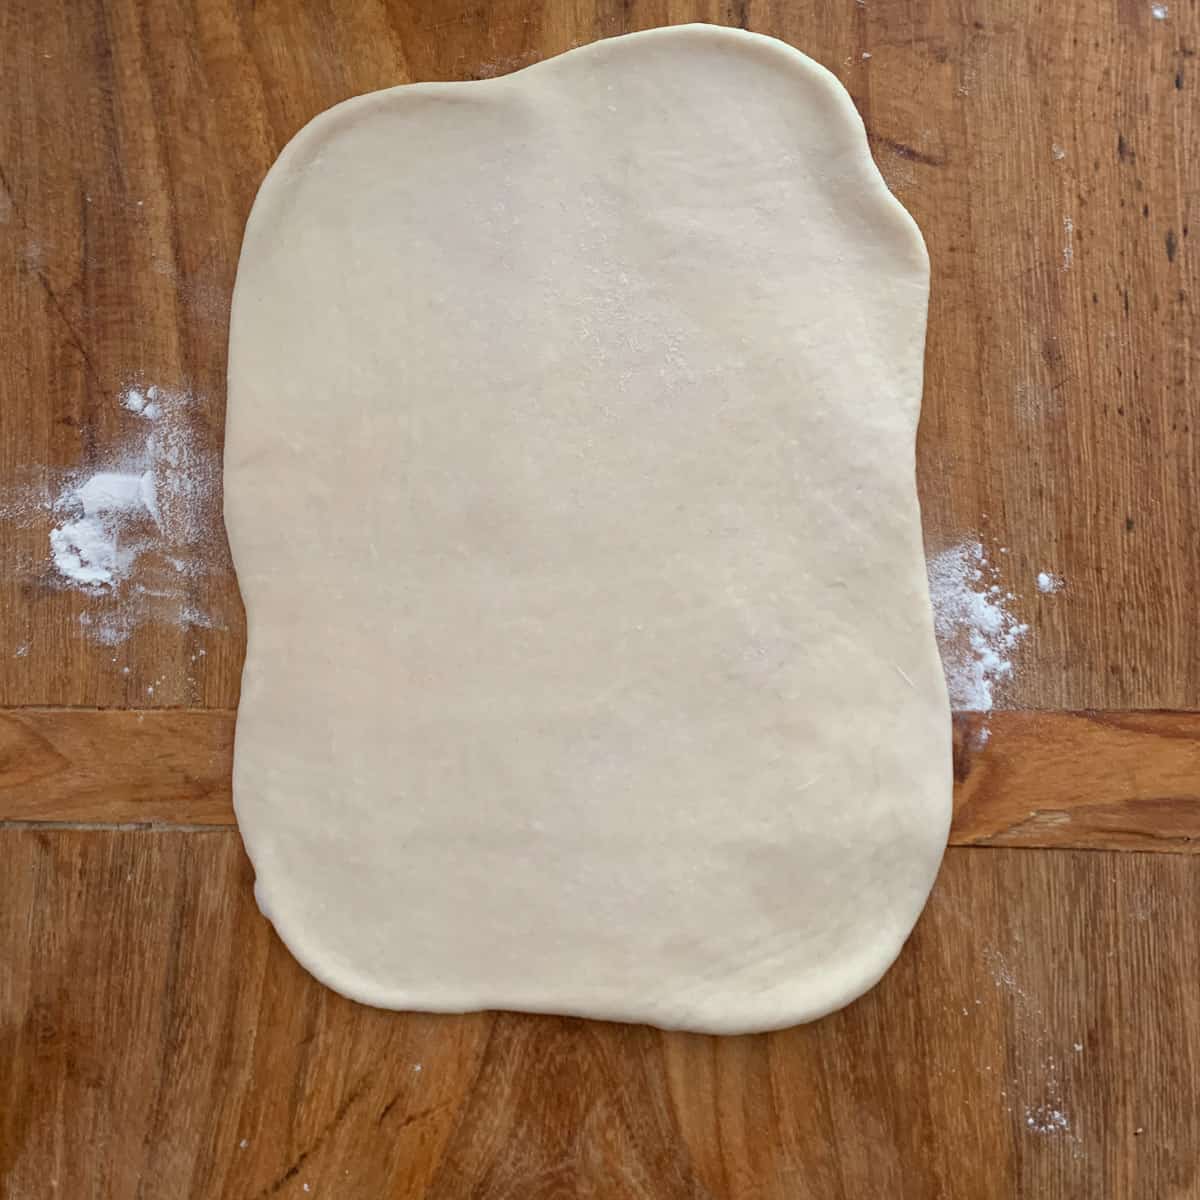 a portion of bread dough rolled out on wooden board